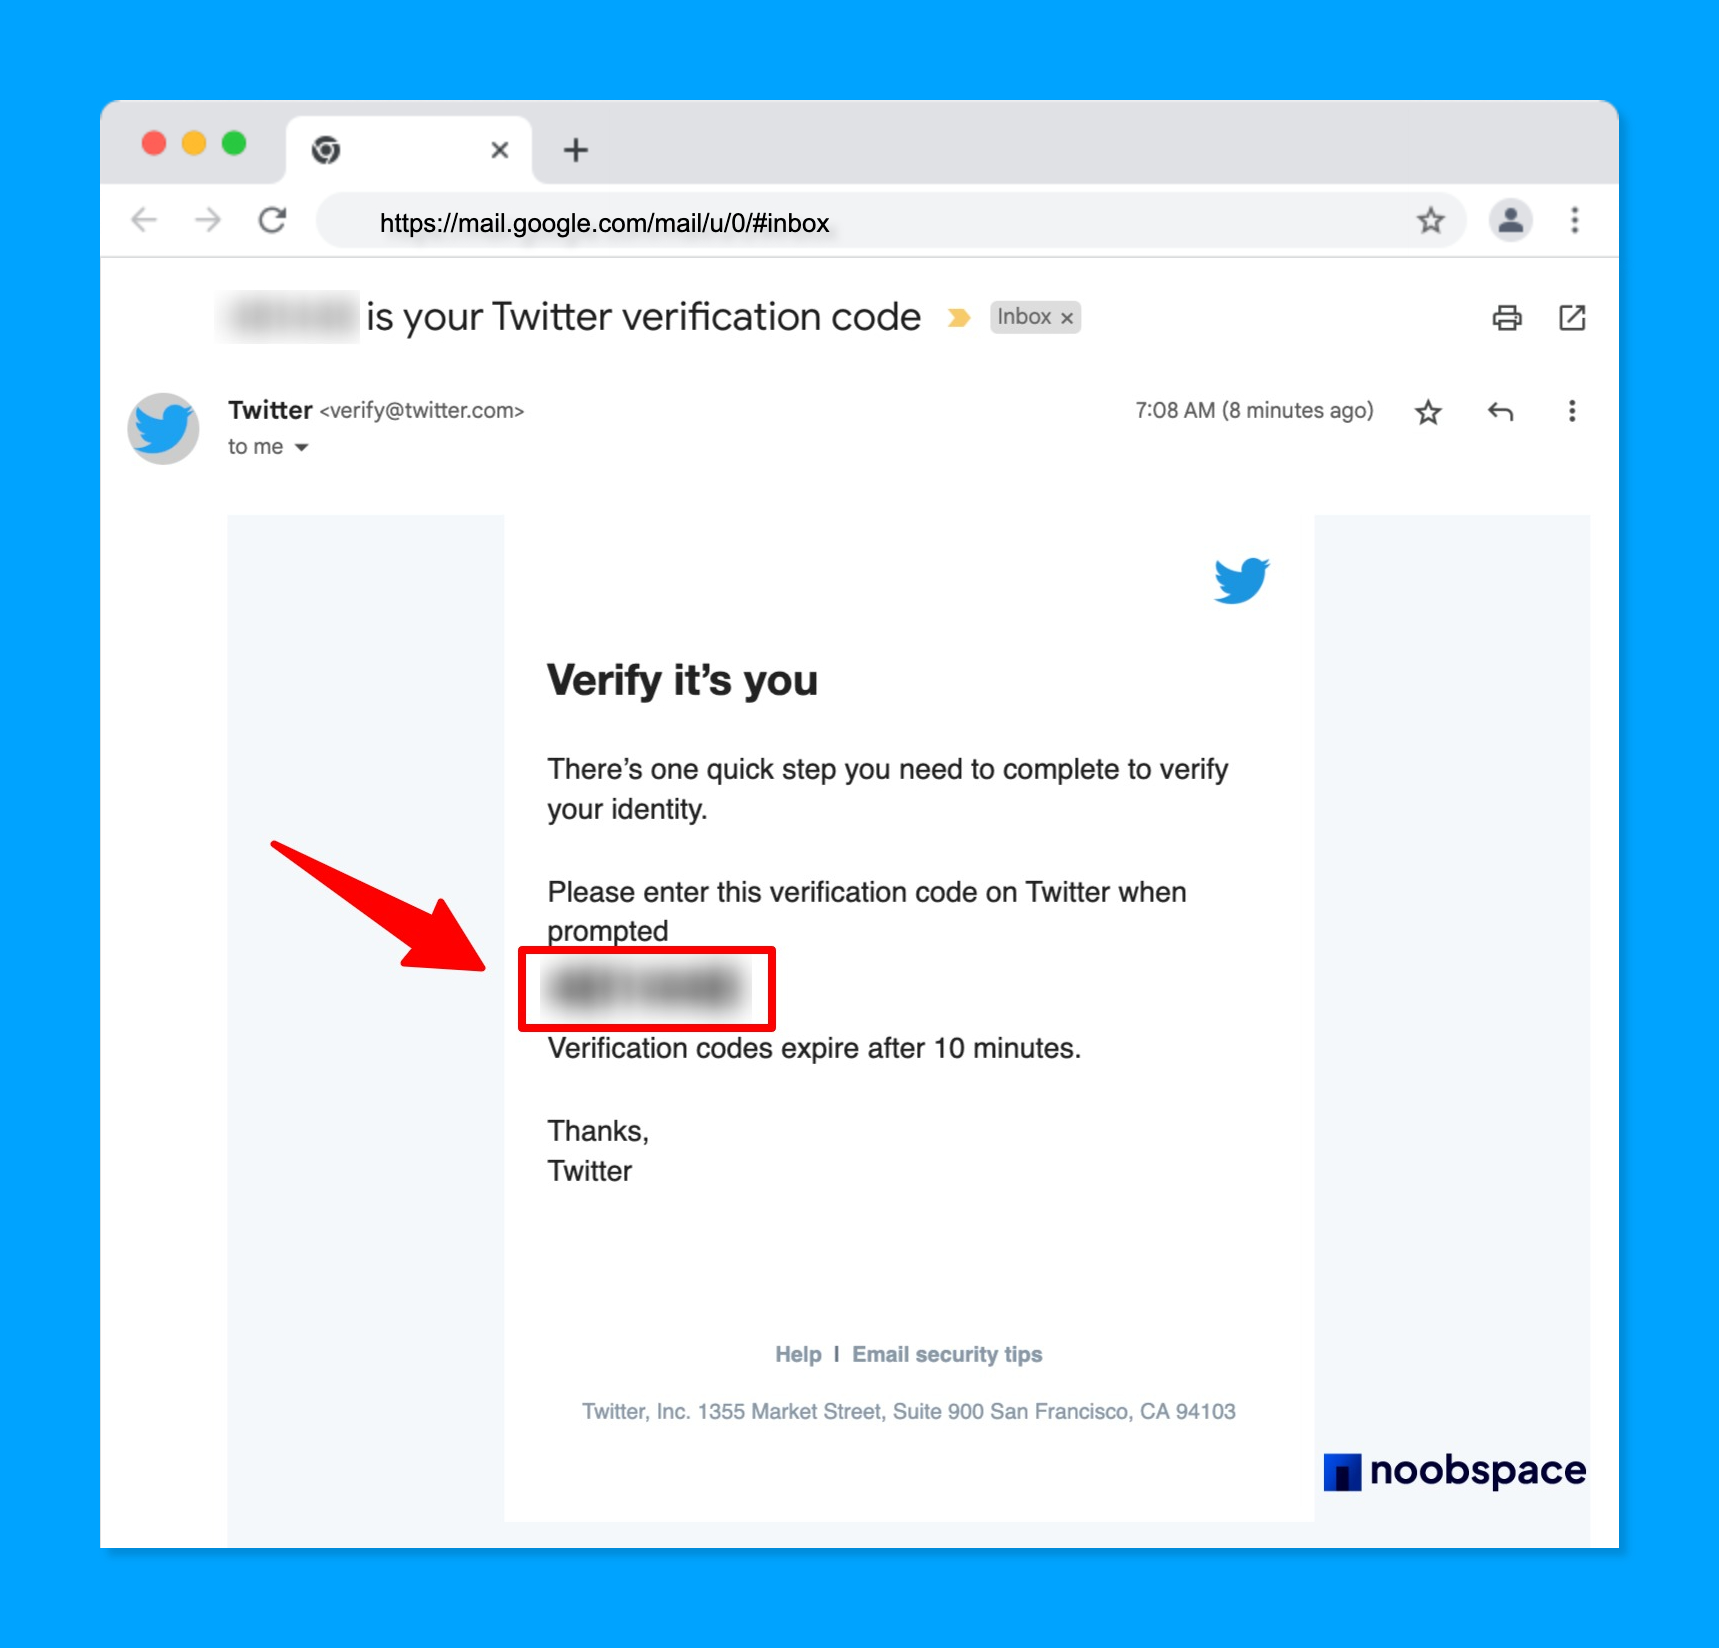 Twitter verification code in Gmail